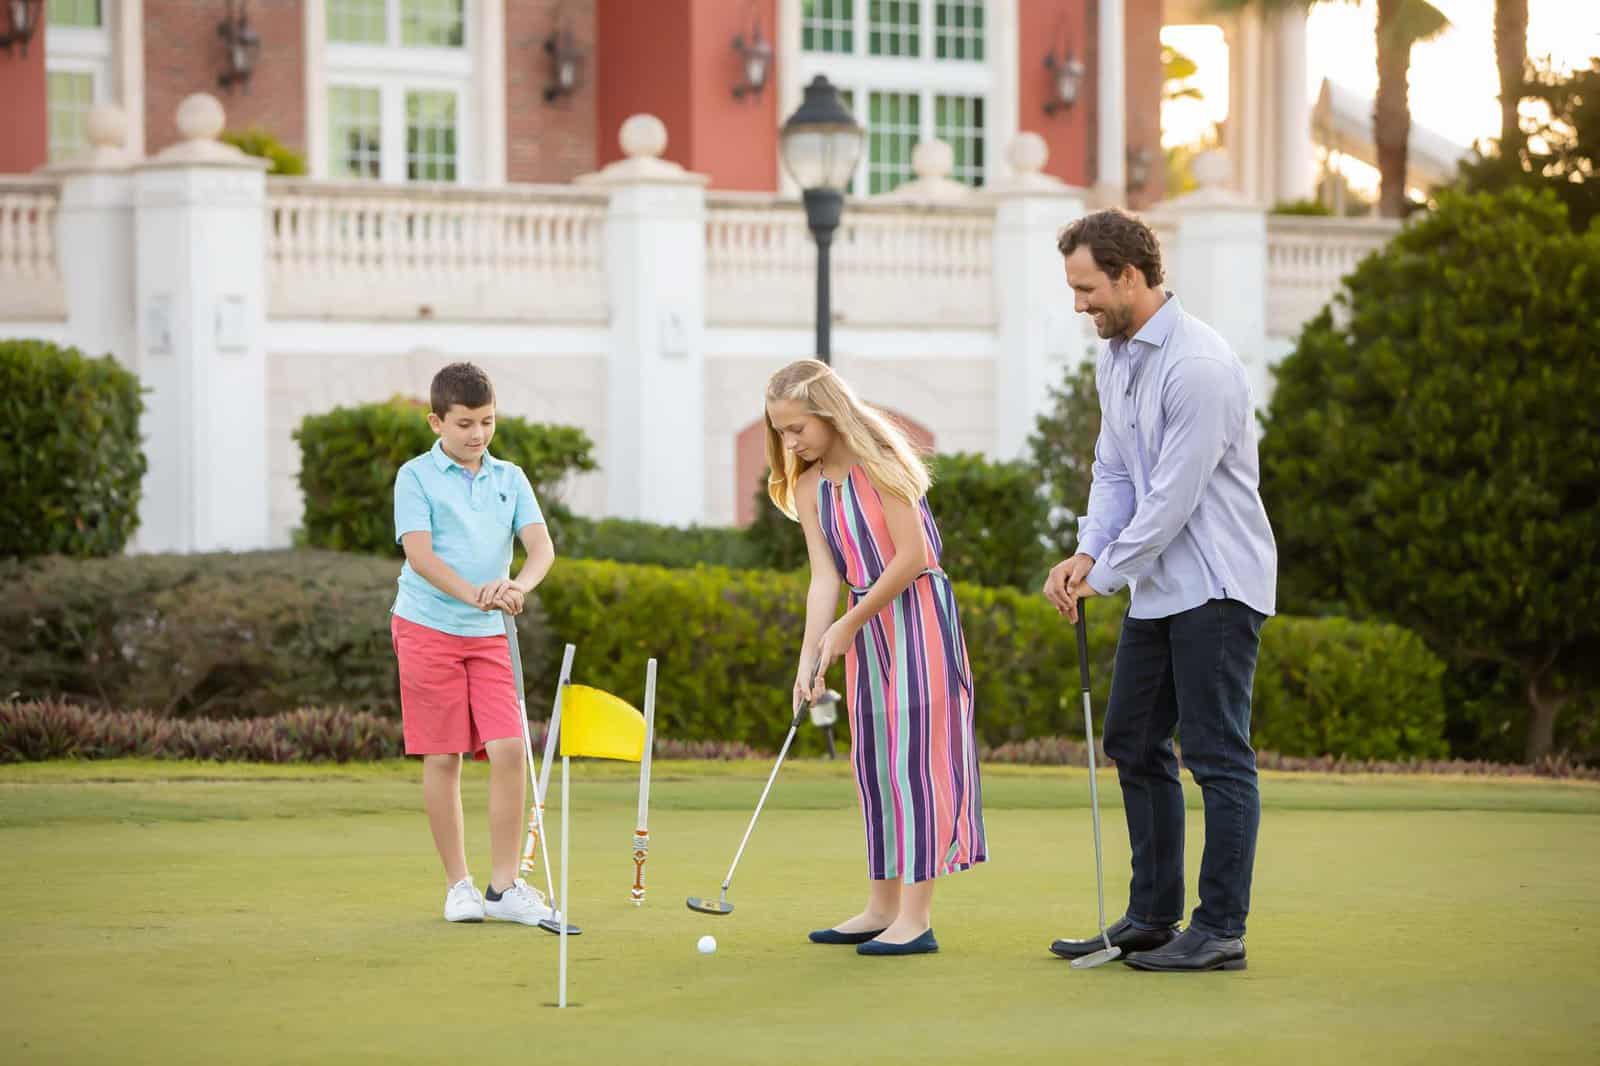 Dad With His Children On A Golf Course Putting Green.